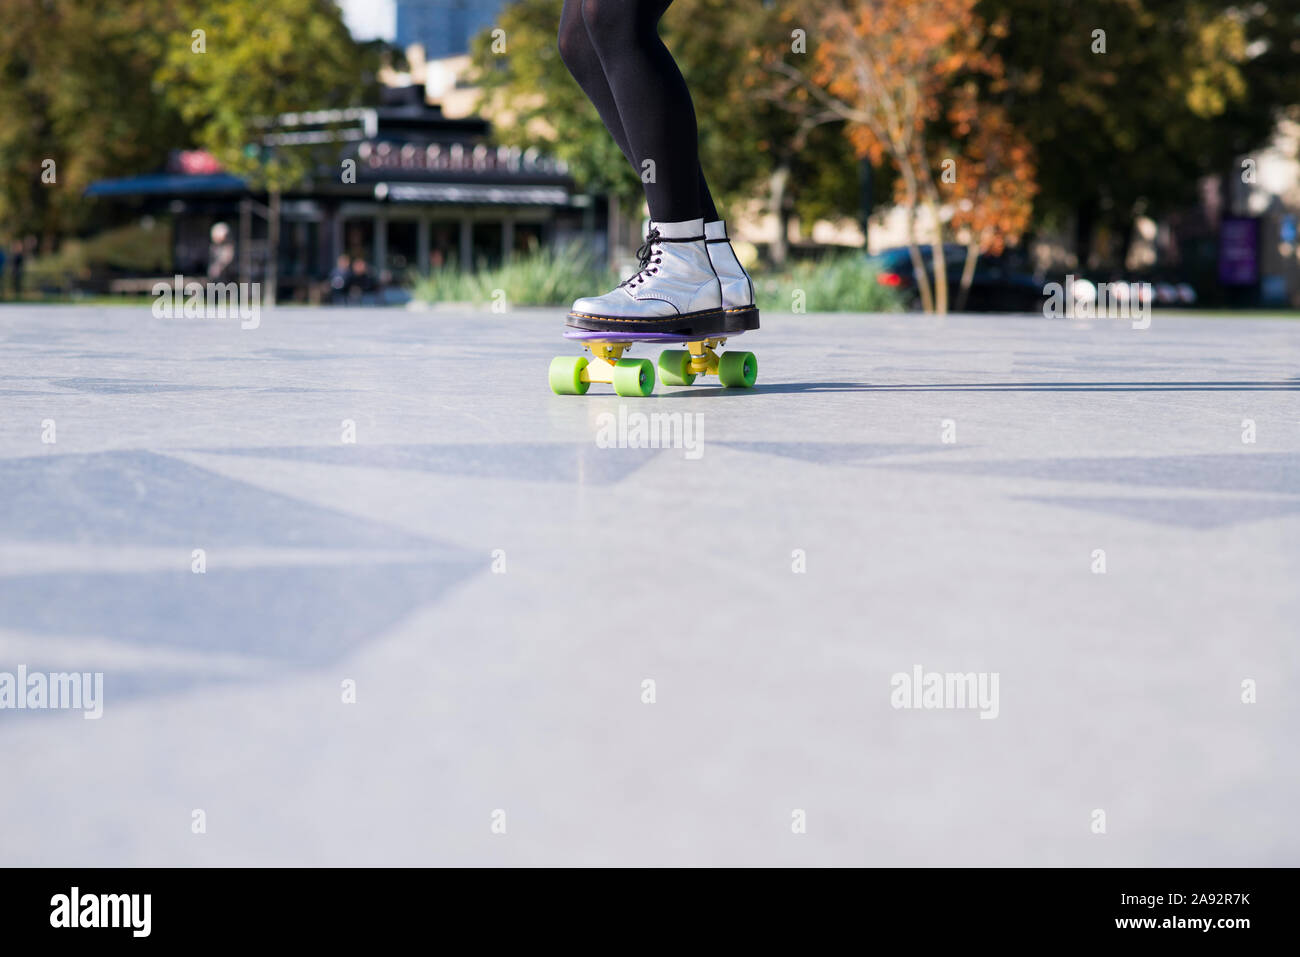 Woman skateboarding, low section Stock Photo